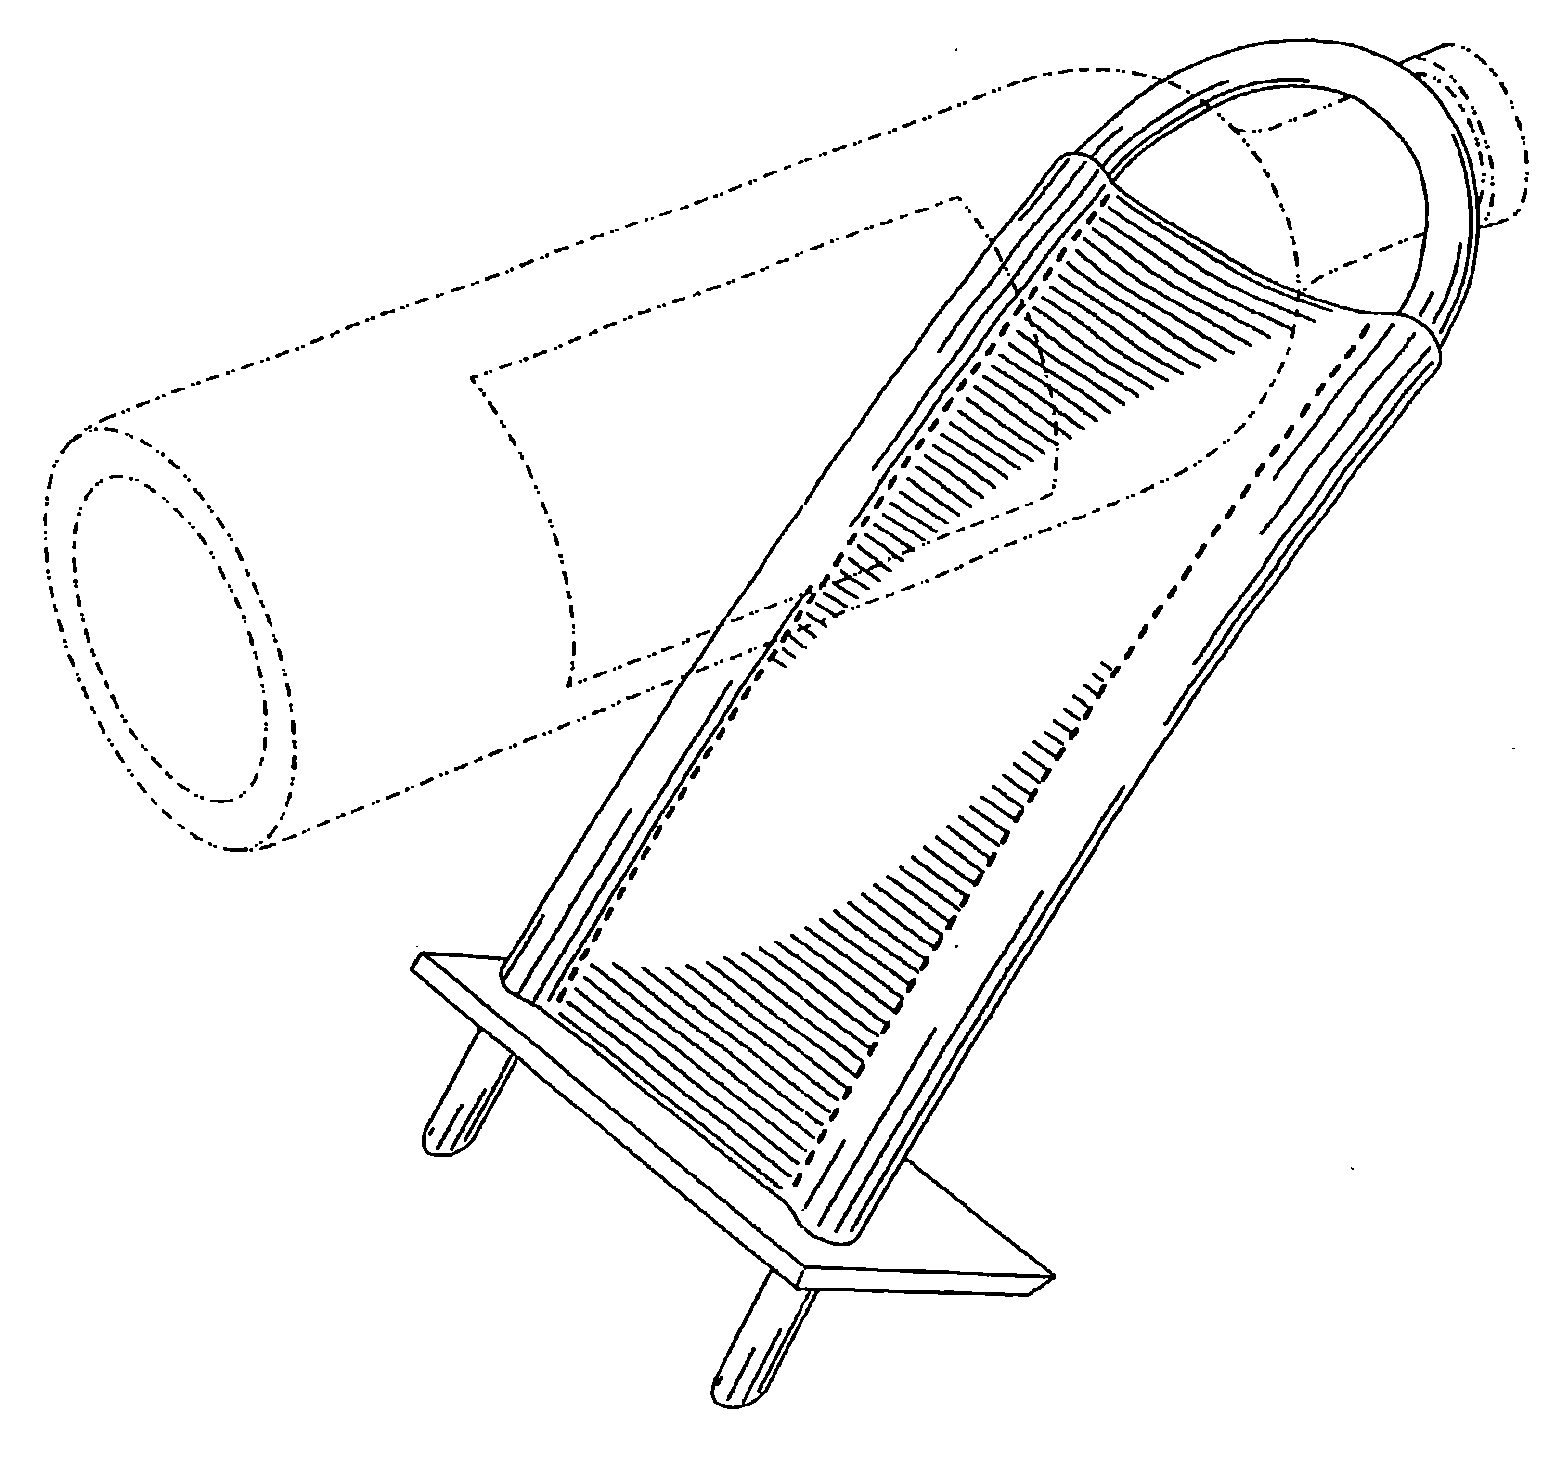 Example of a design for a holder for a beverage containteror bottle. 
